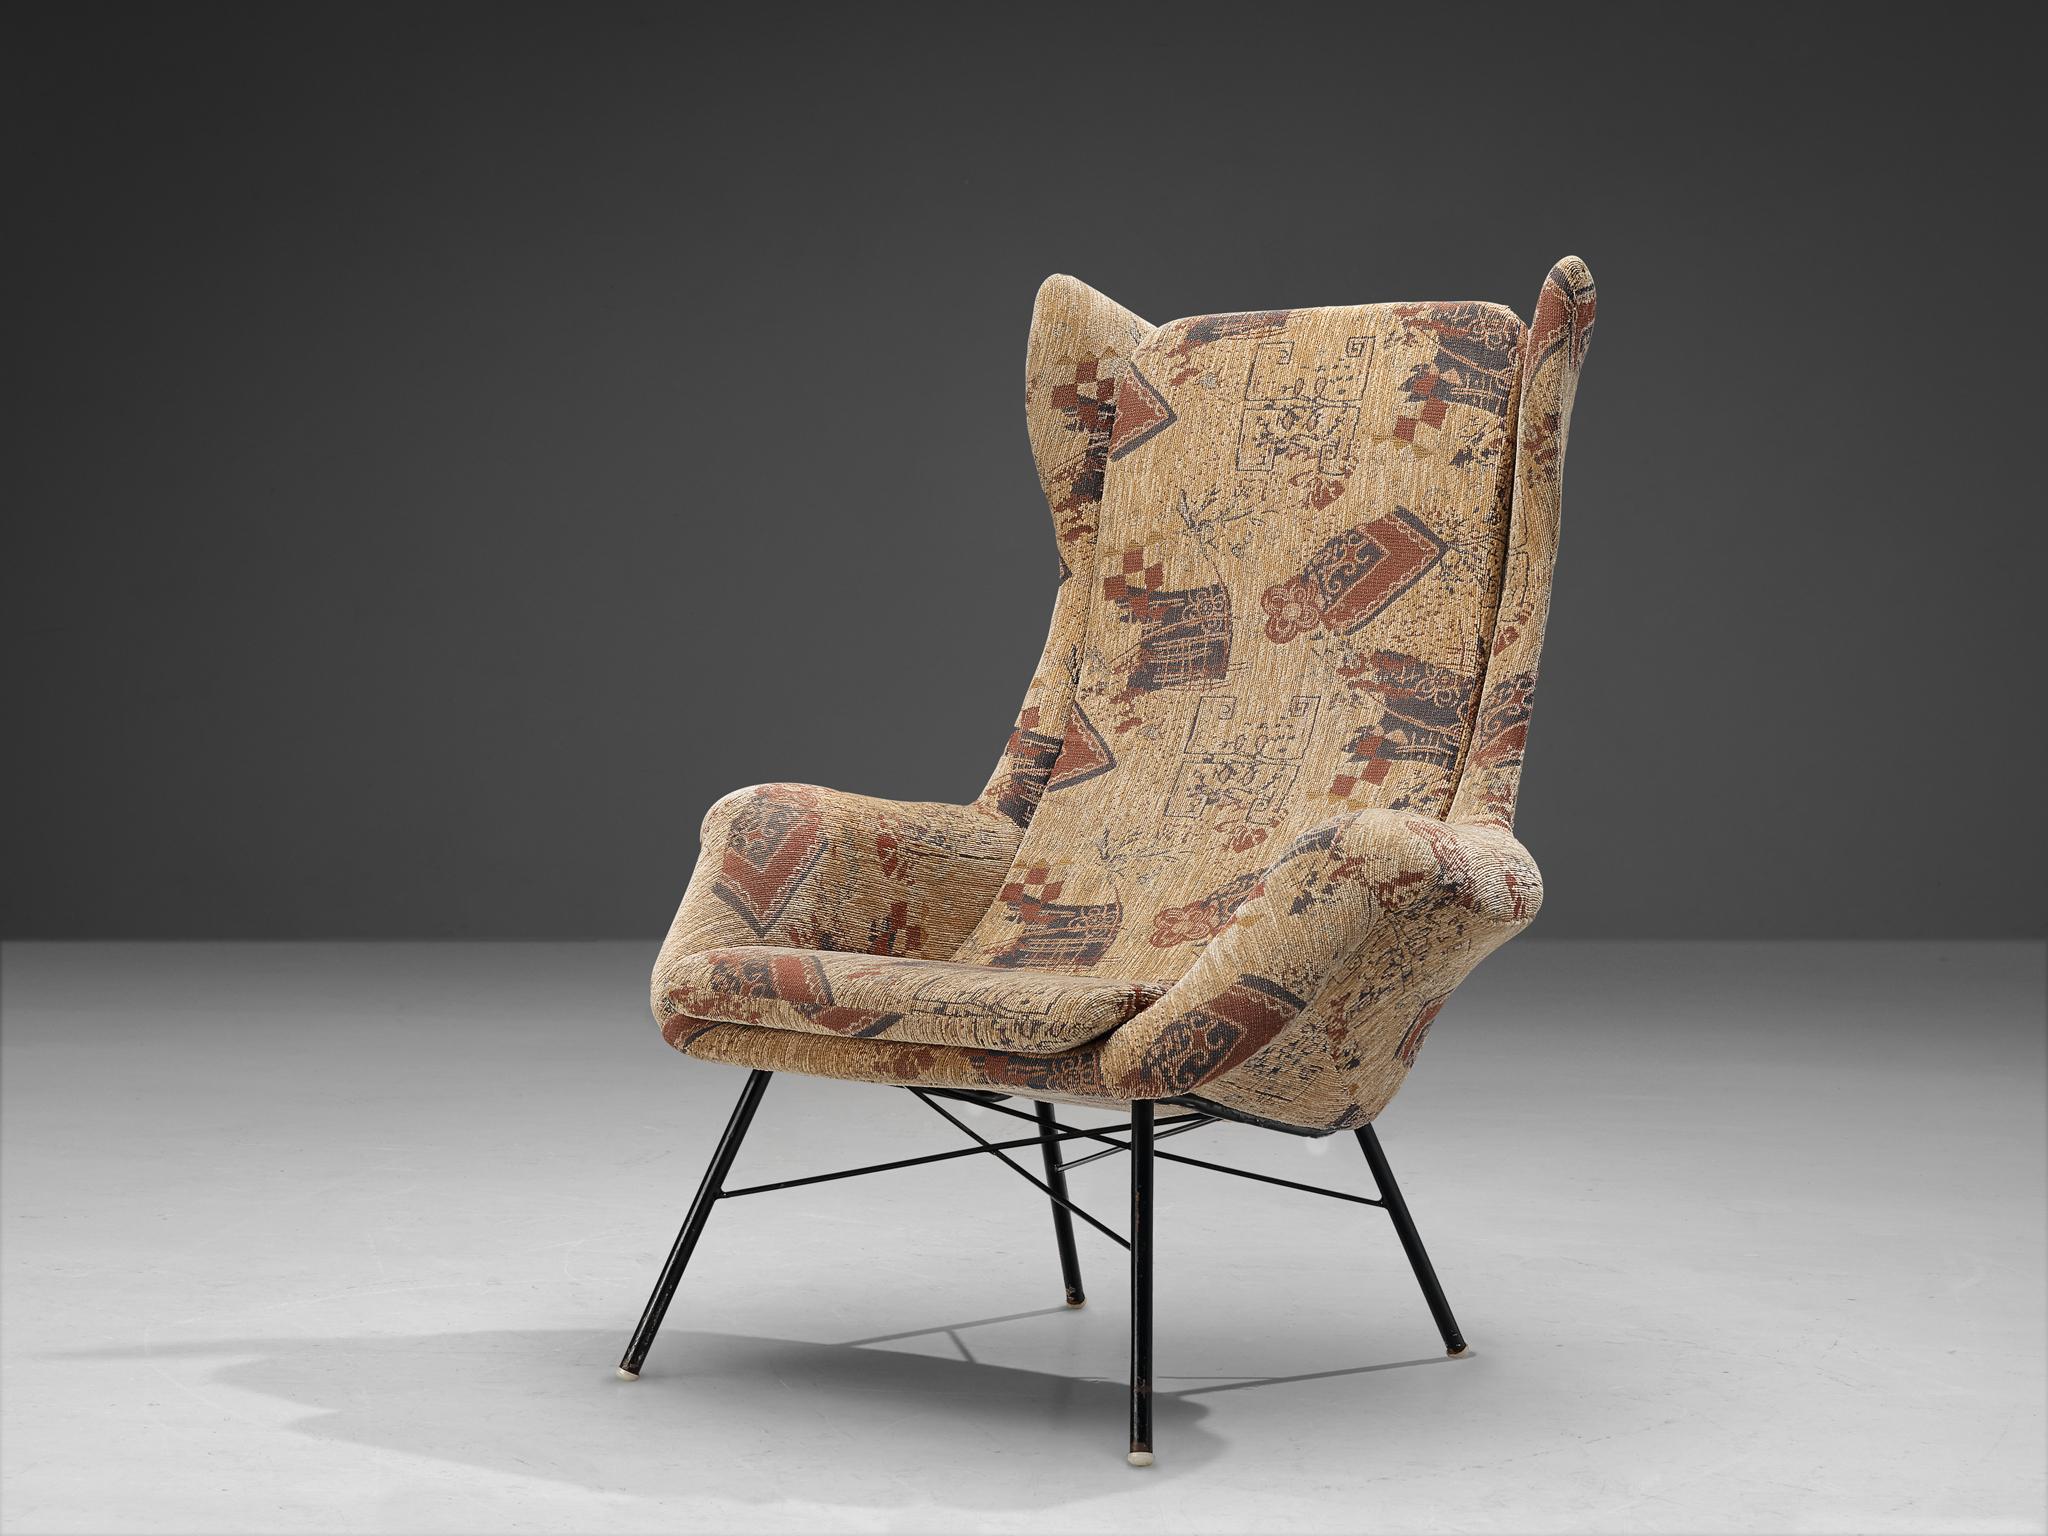 Miroslav Navratil, lounge chair, fabric, metal, Czech Republic, 1950s

This well-executed lounge chair is designed by Miroslav Navratil in his own atelier and is reupholstered in a delicate upholstery featuring abstract motifs and shapes. The colors